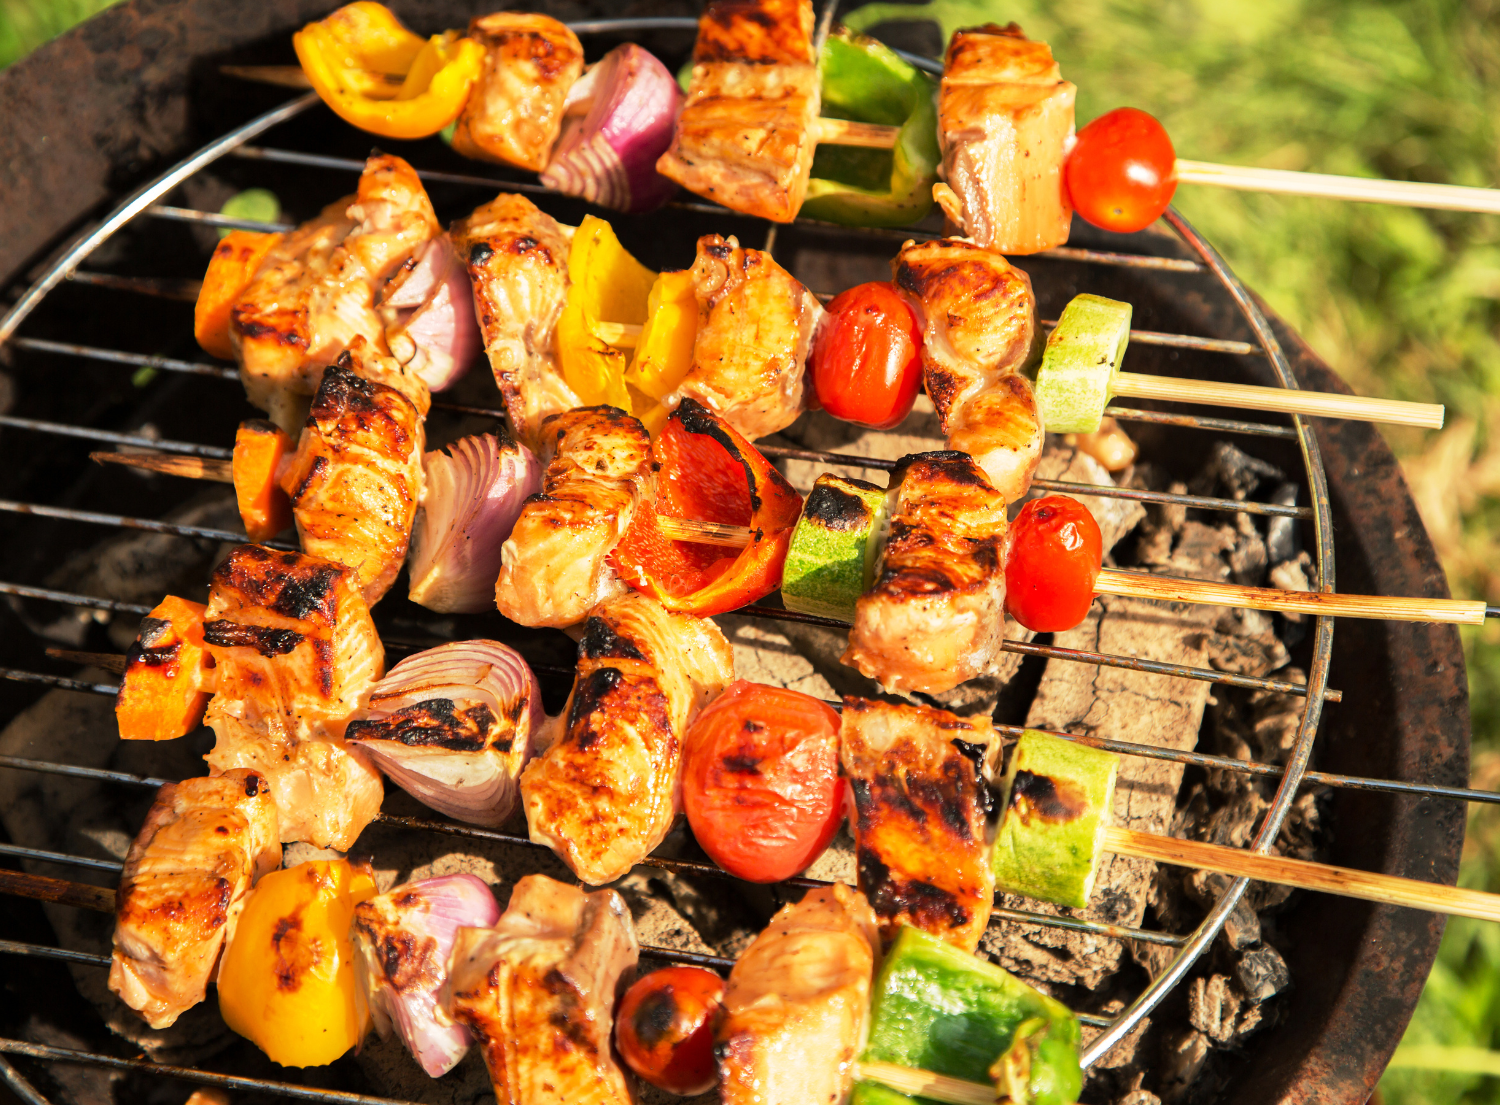 chicken and vegetable skewers being cooked on a grill